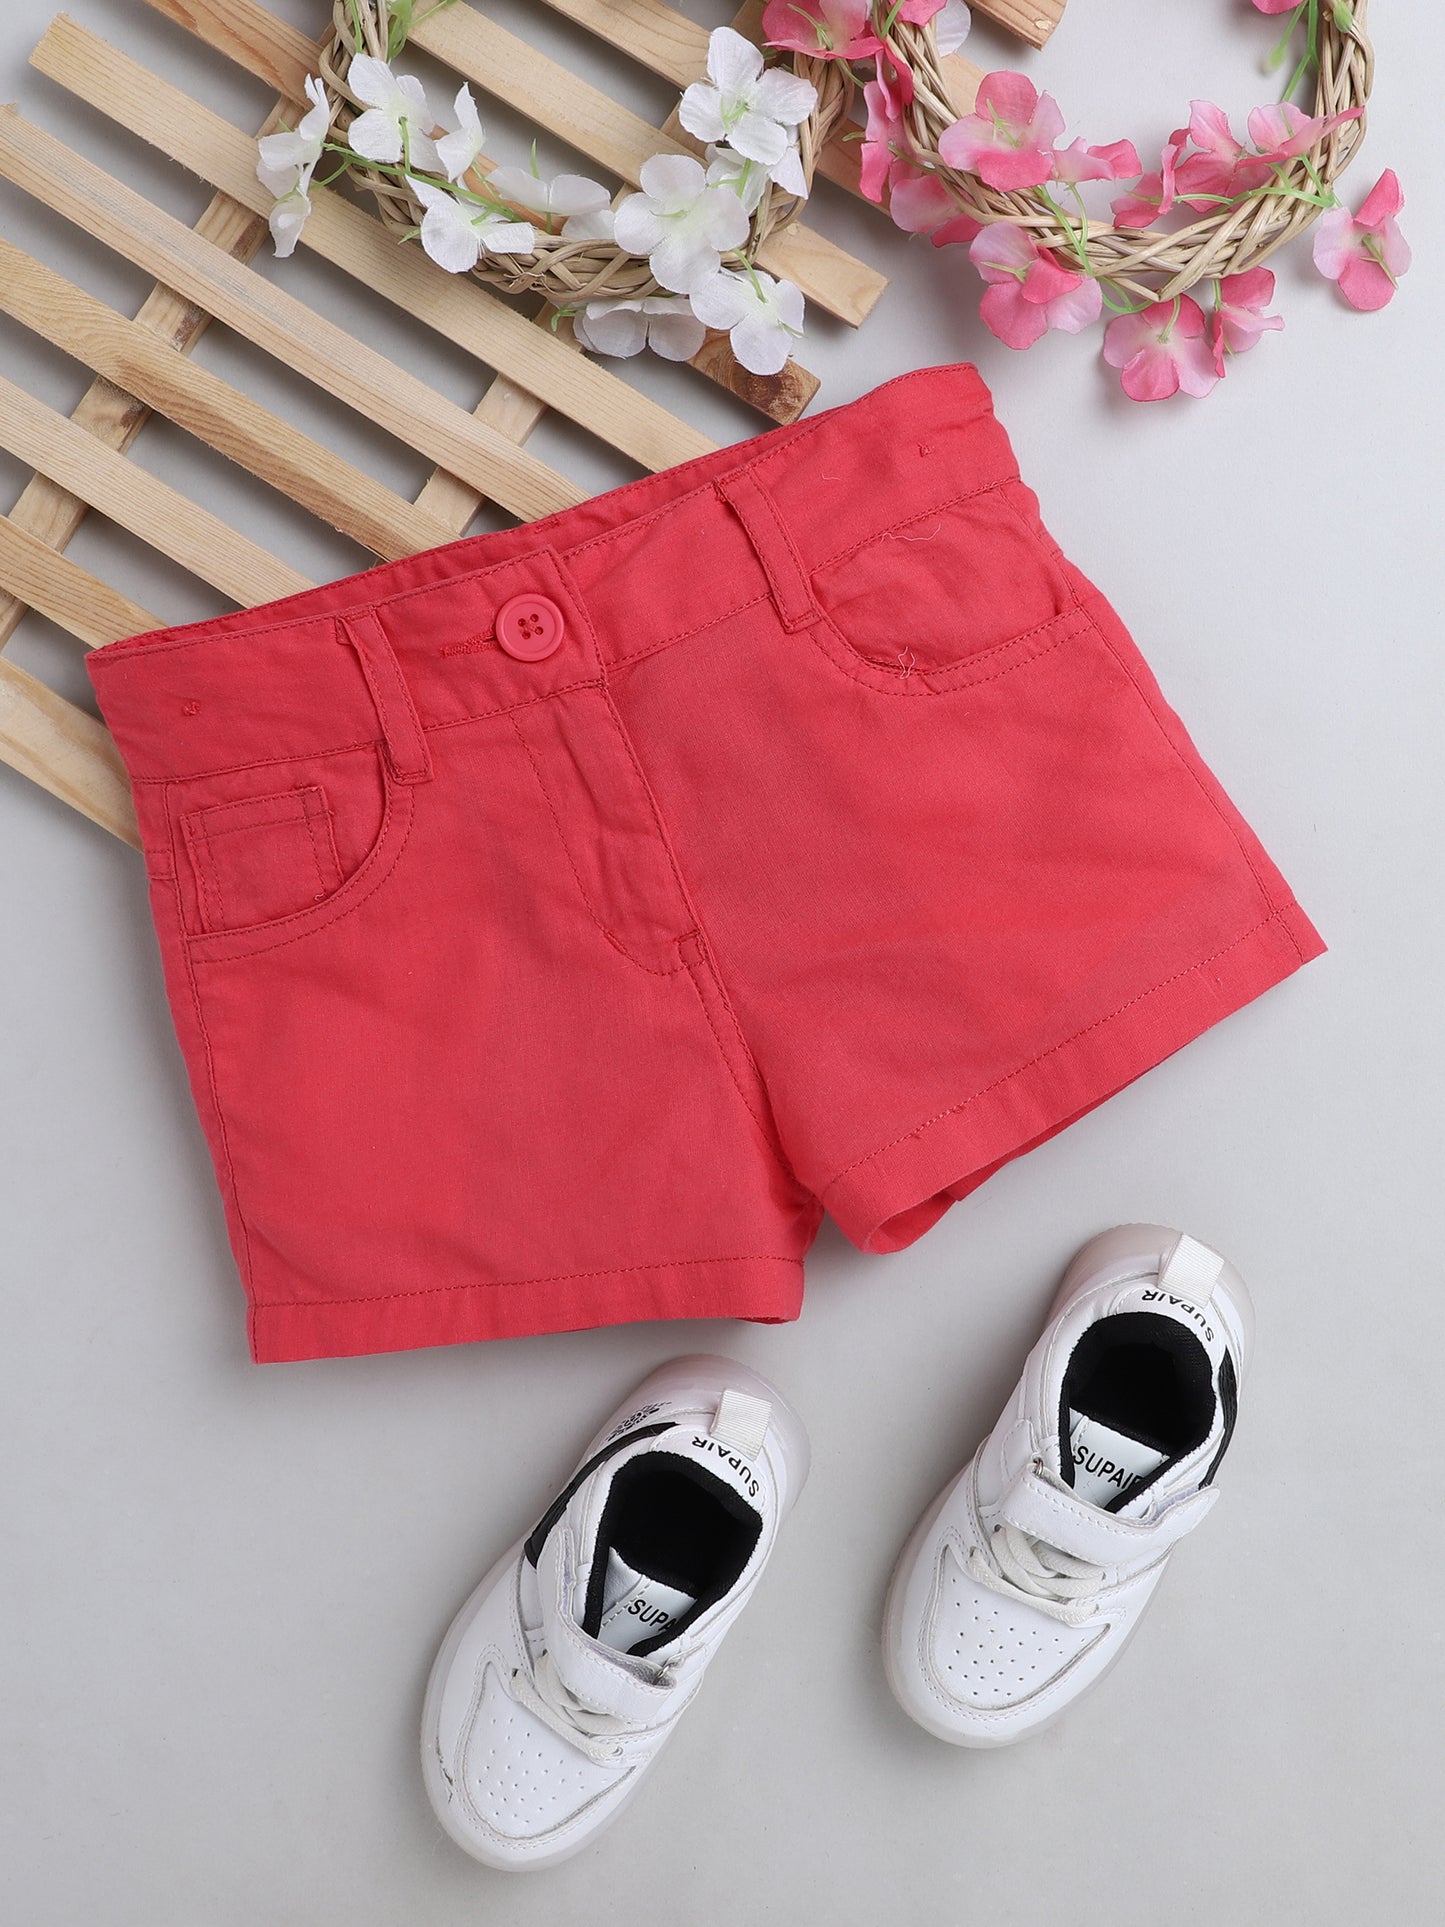 Girls' Shorts with Adjustable Waist- Pink